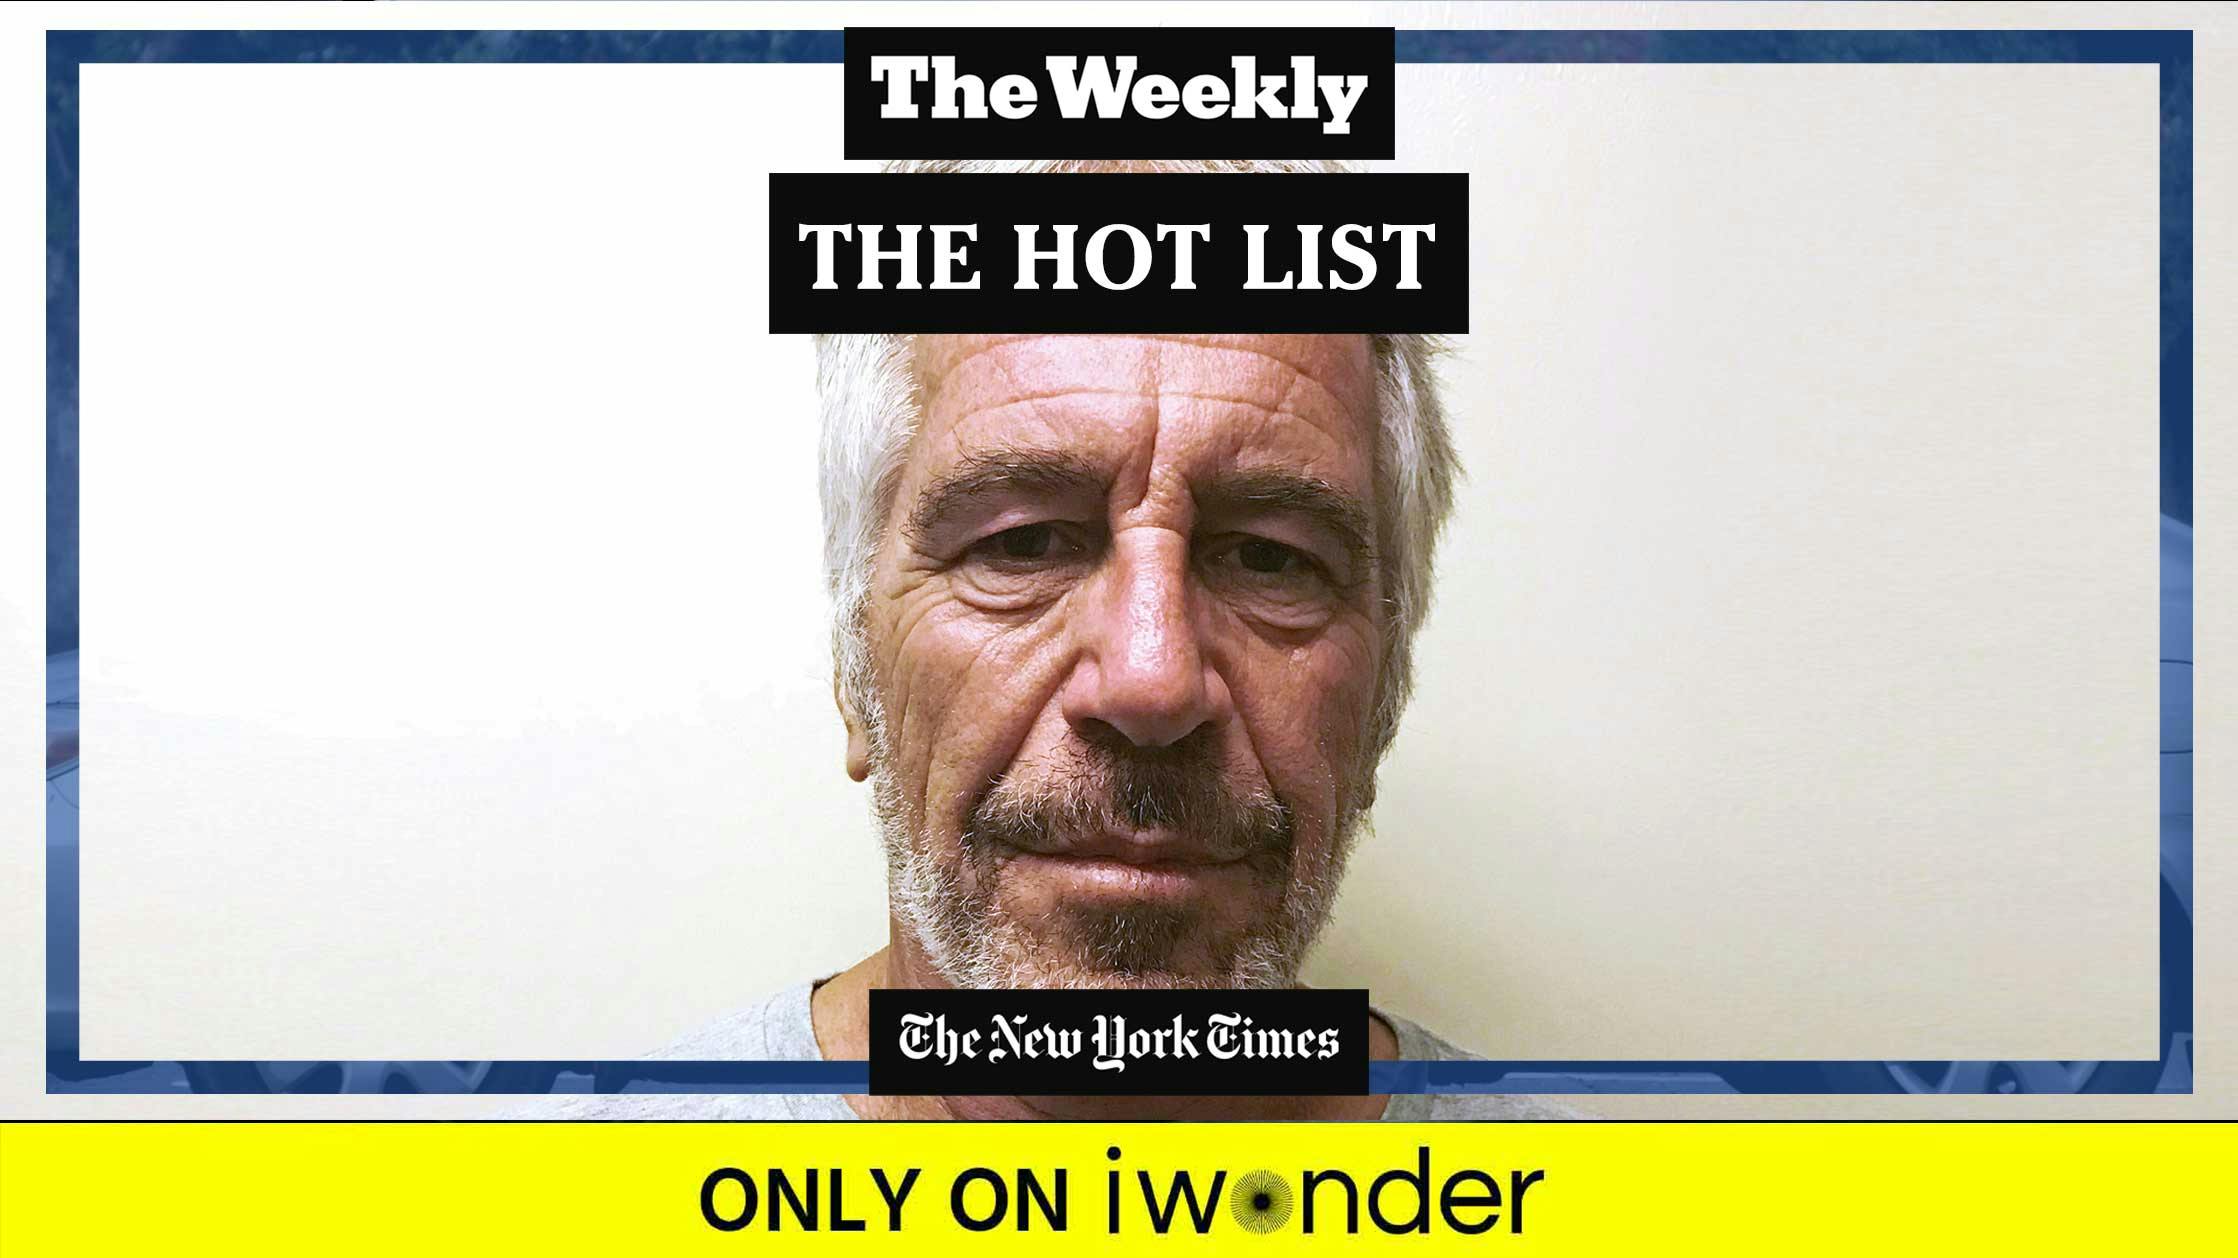 The Weekly: The Hot List